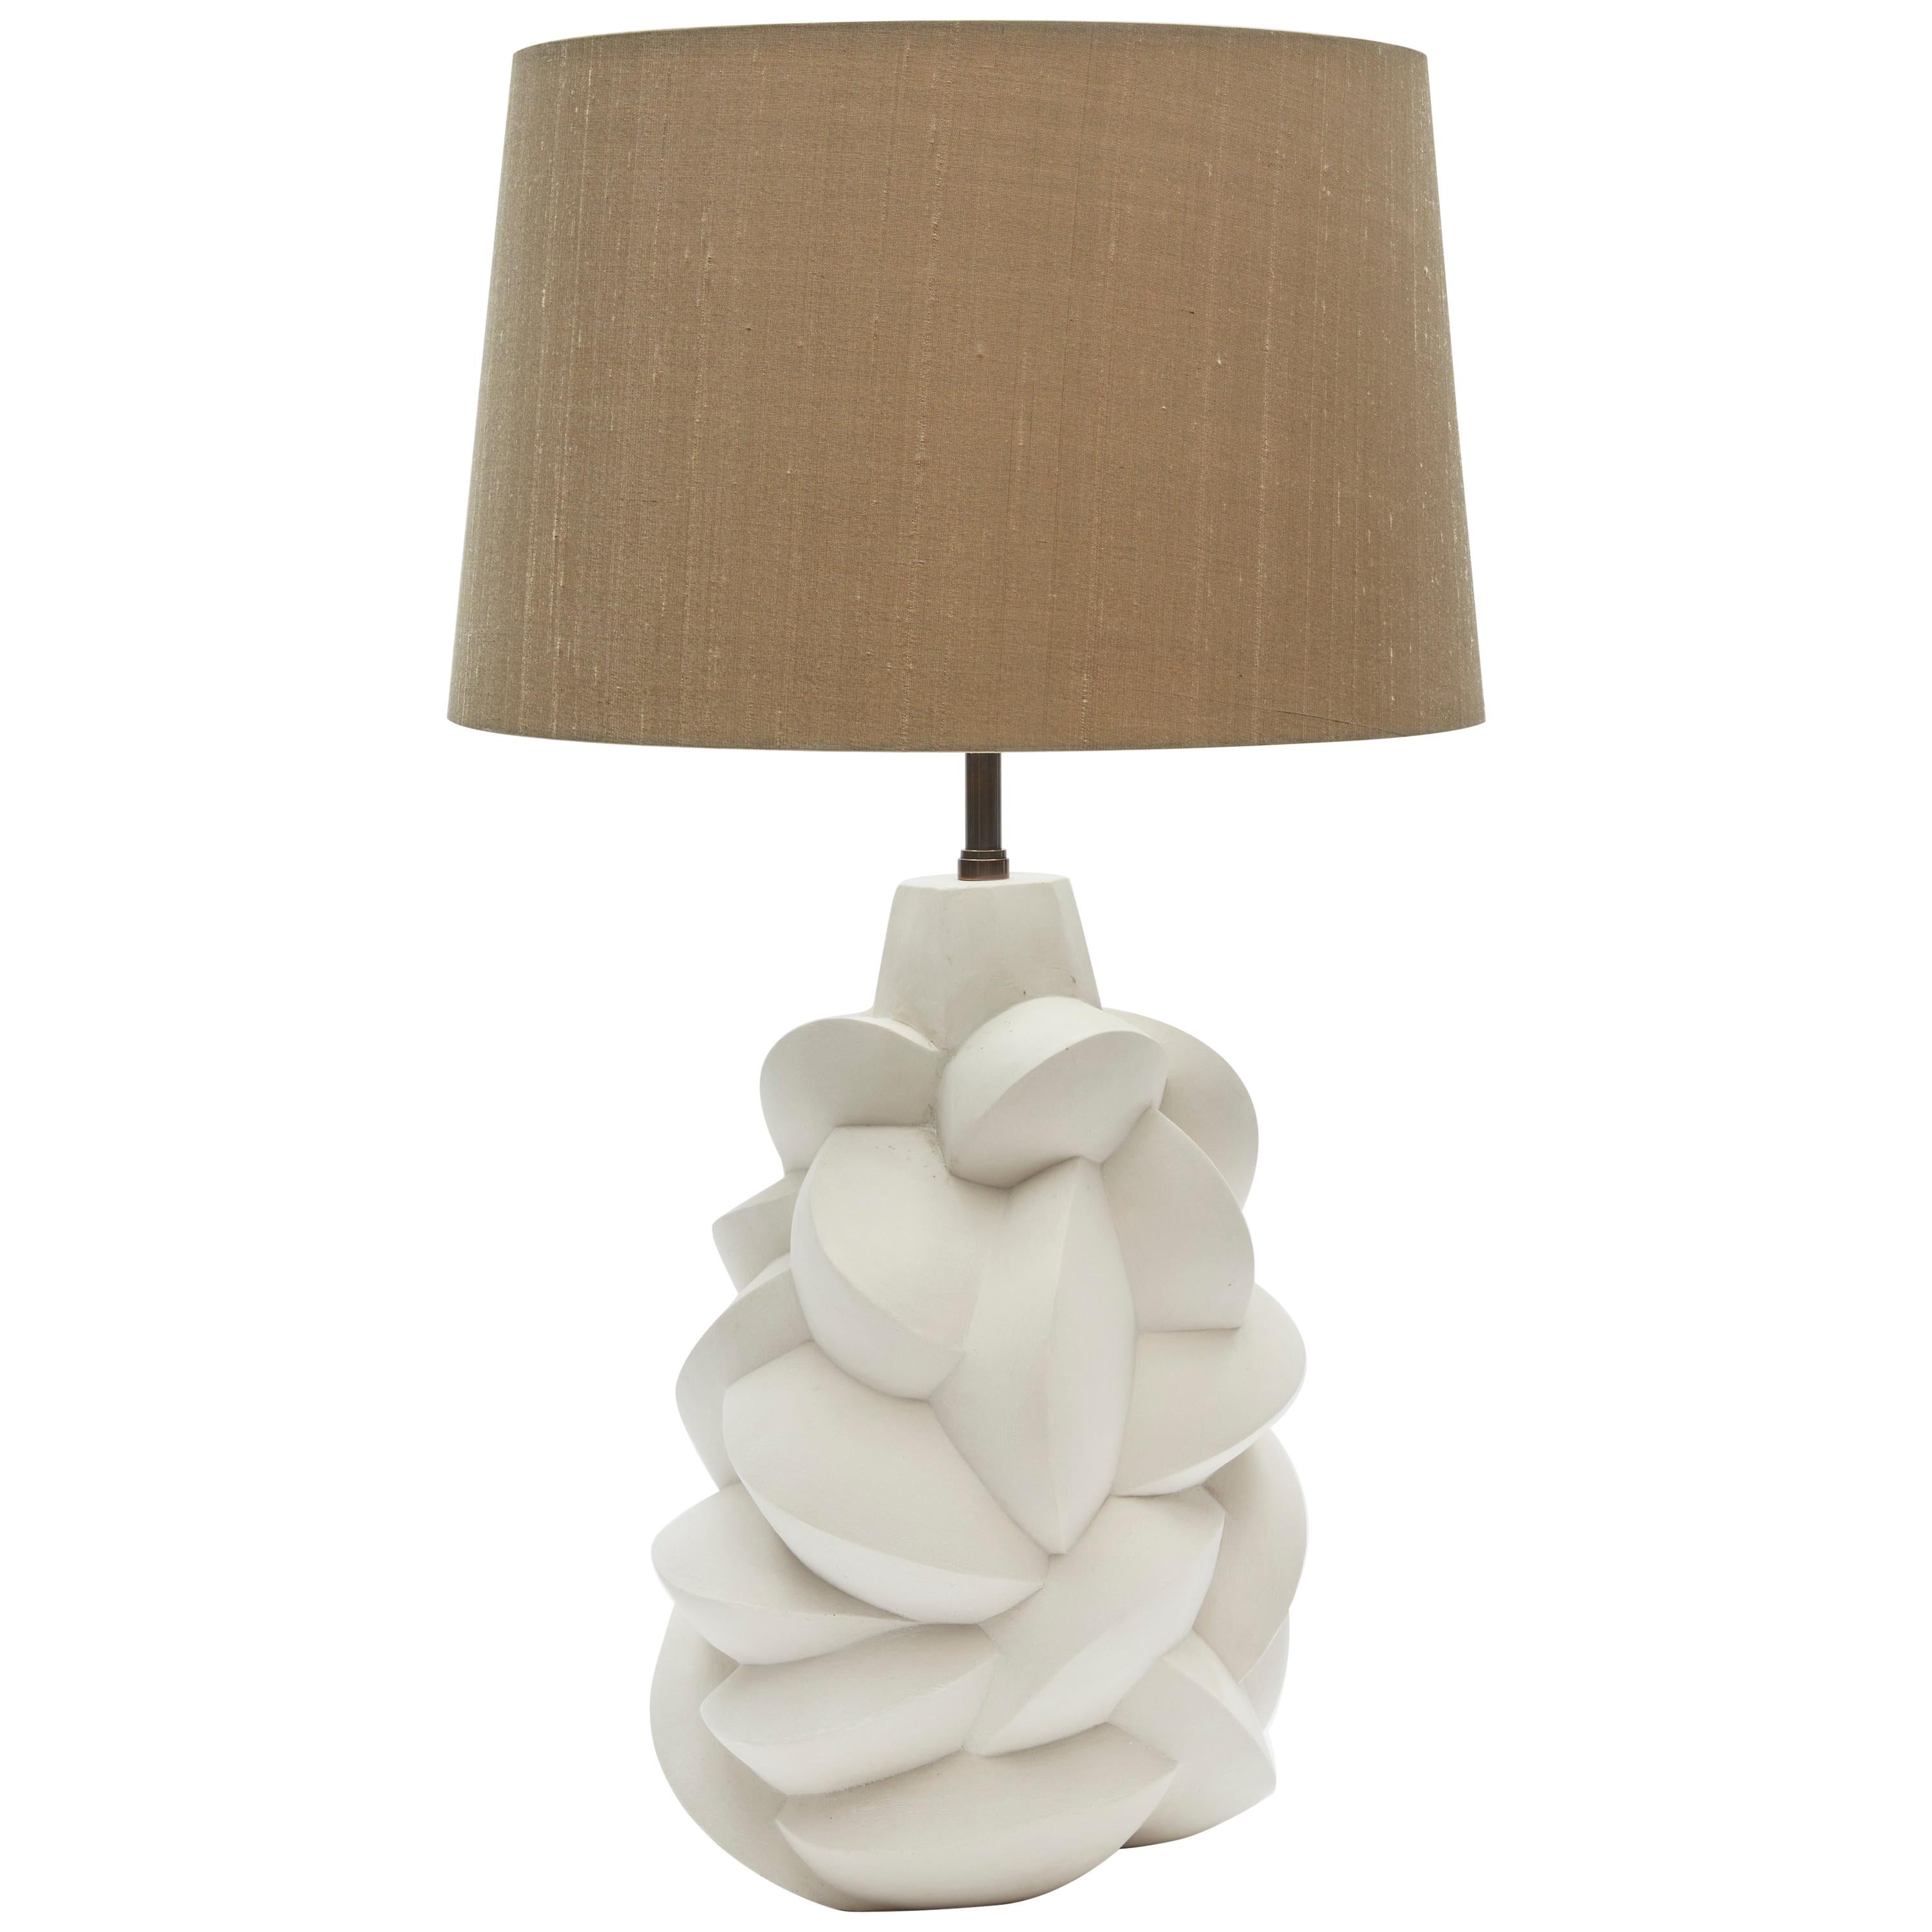 Sculptural Plaster Table Lamp Hand Made in UK Contemporary 21st Century For Sale